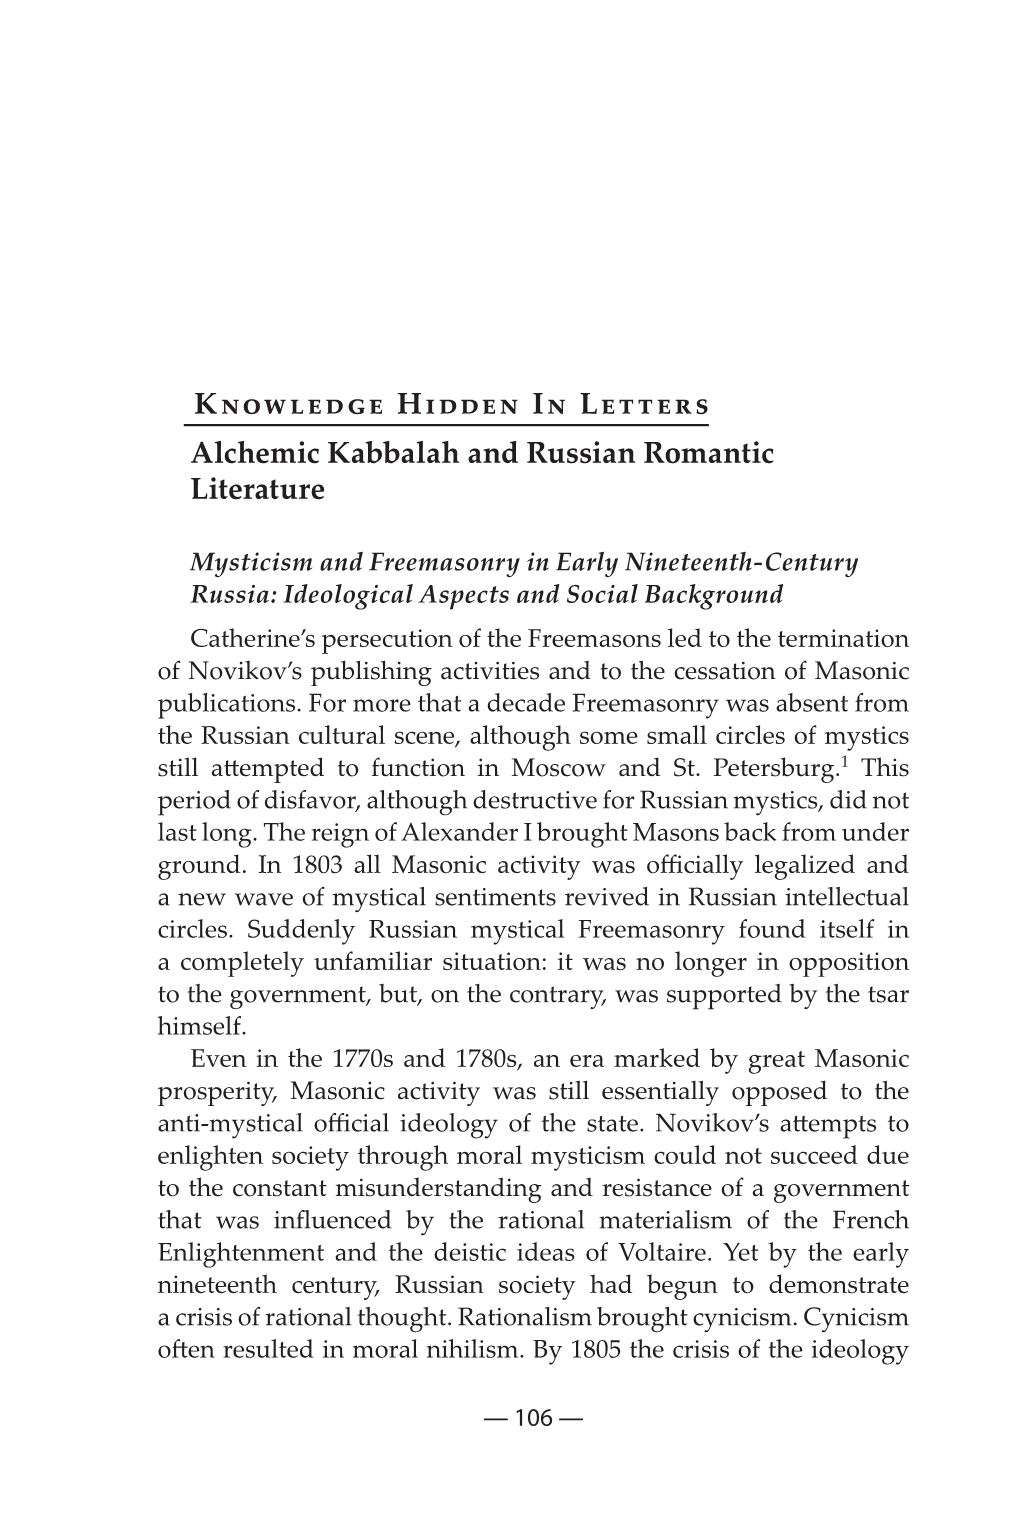 Knowledge Hidden in Letters Alchemic Kabbalah and Russian Romantic Literature